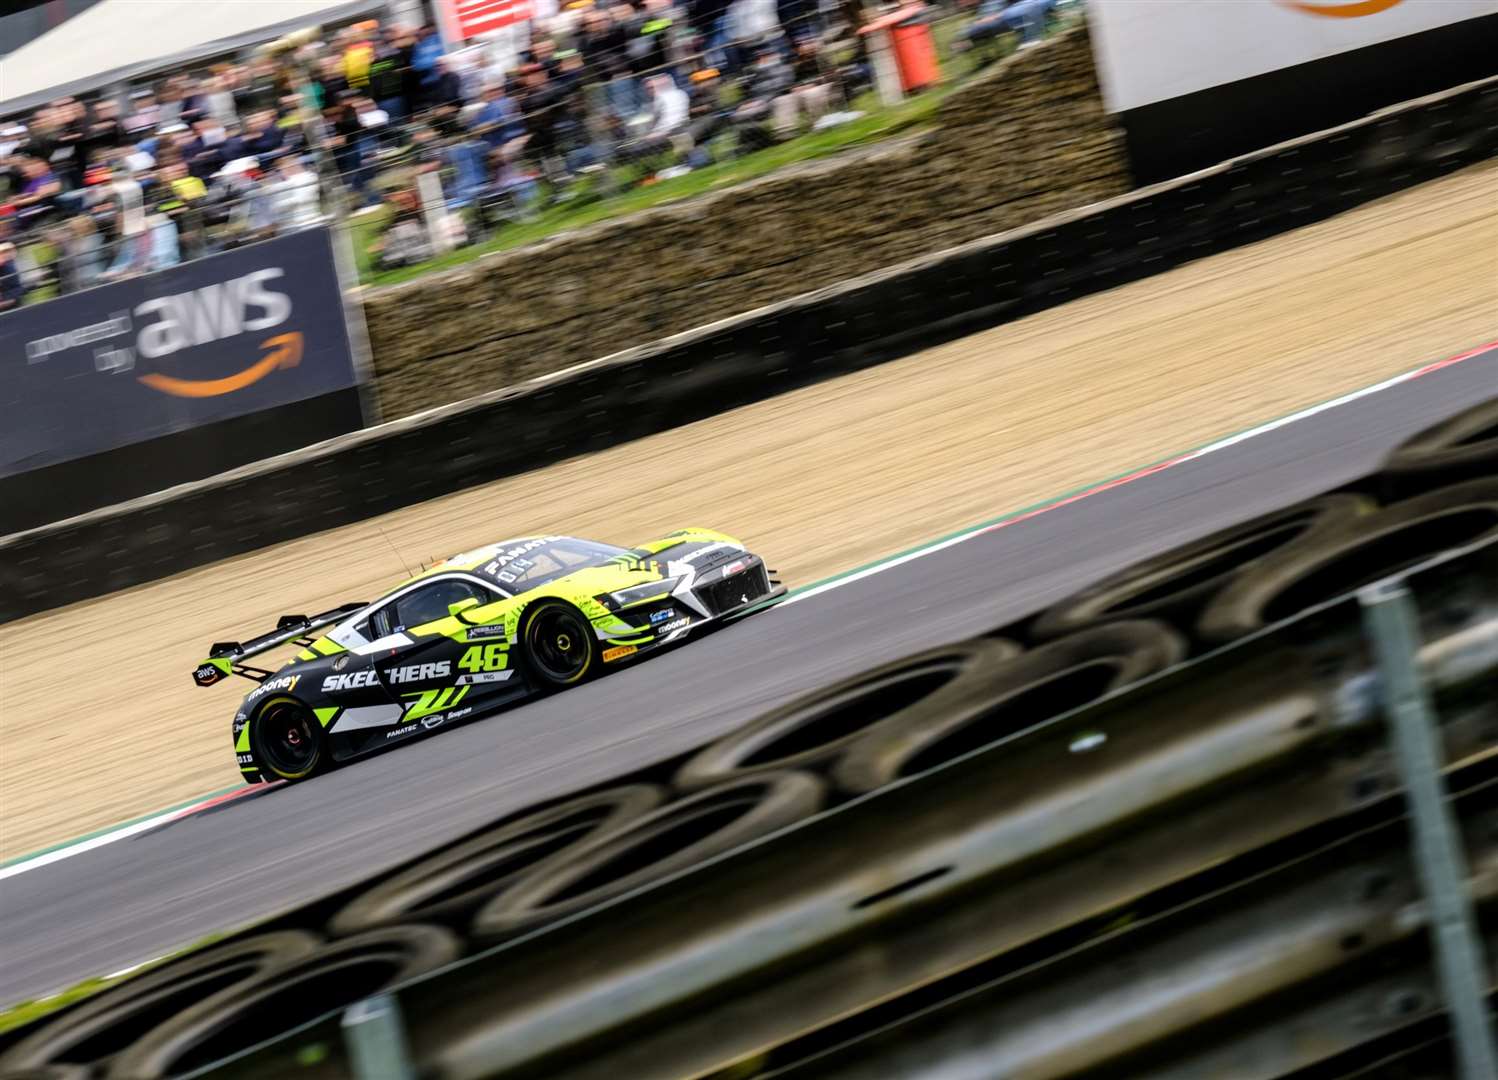 Rossi in action at Brands Hatch last season. Picture: SRO